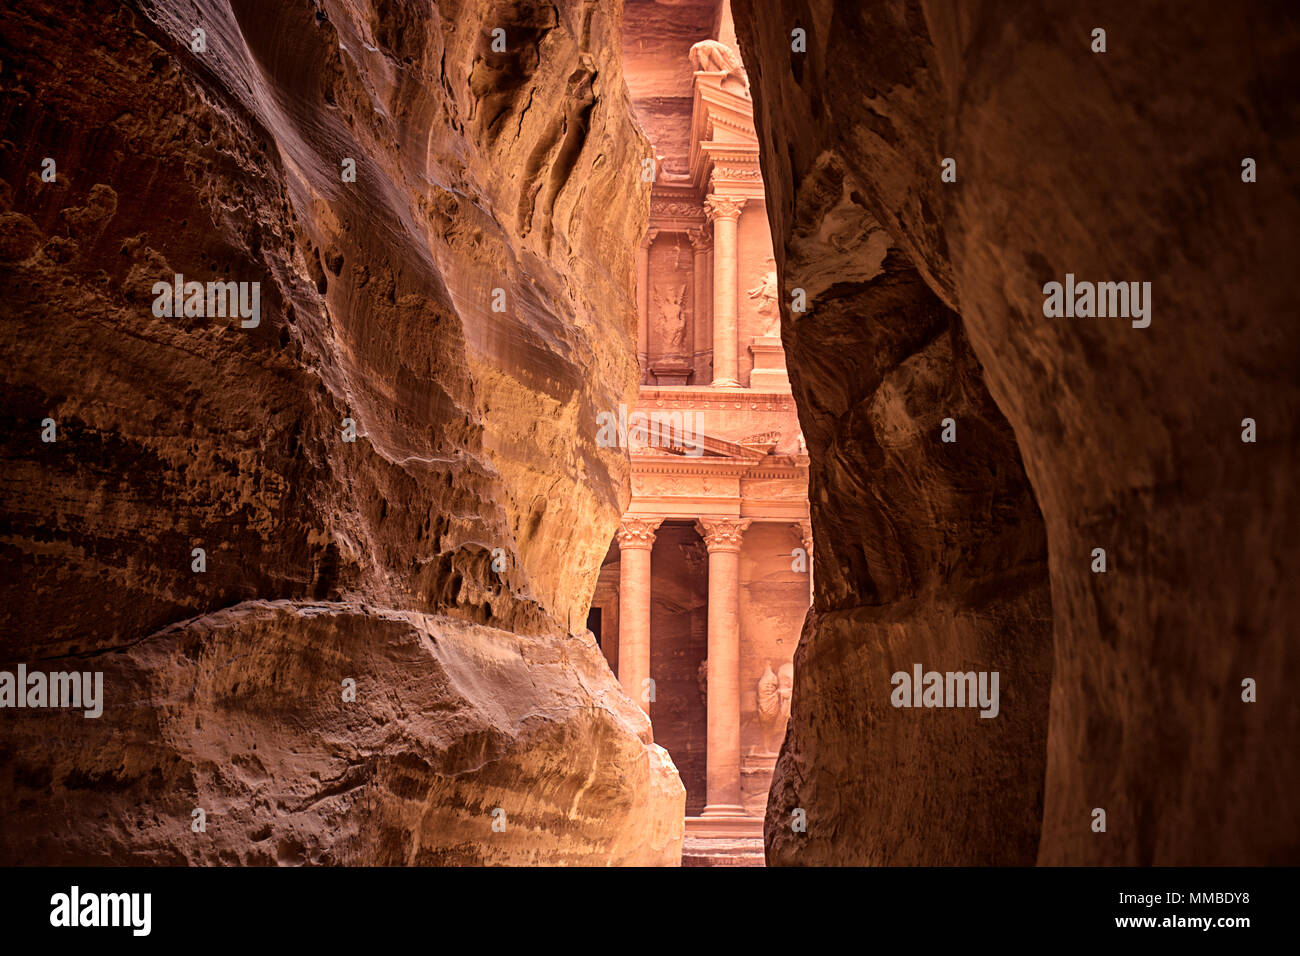 The Ancient city of Petra Stock Photo